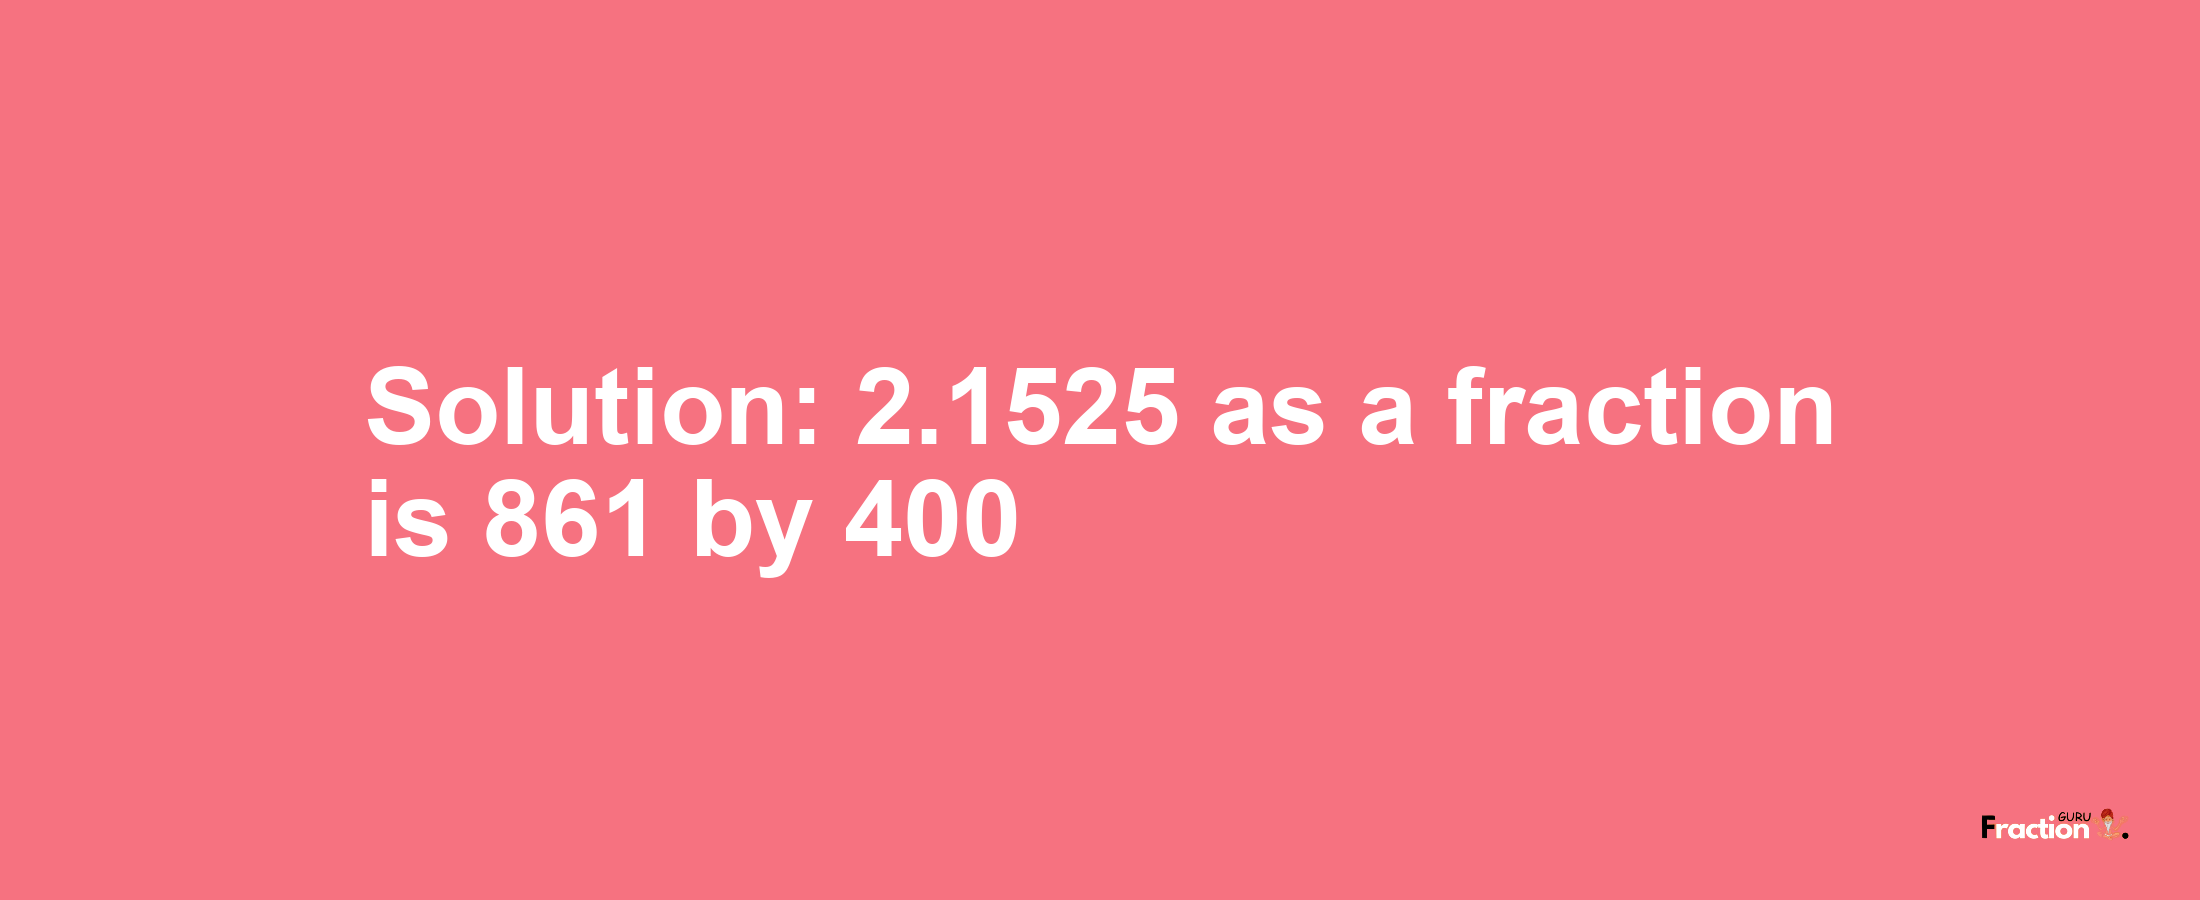 Solution:2.1525 as a fraction is 861/400